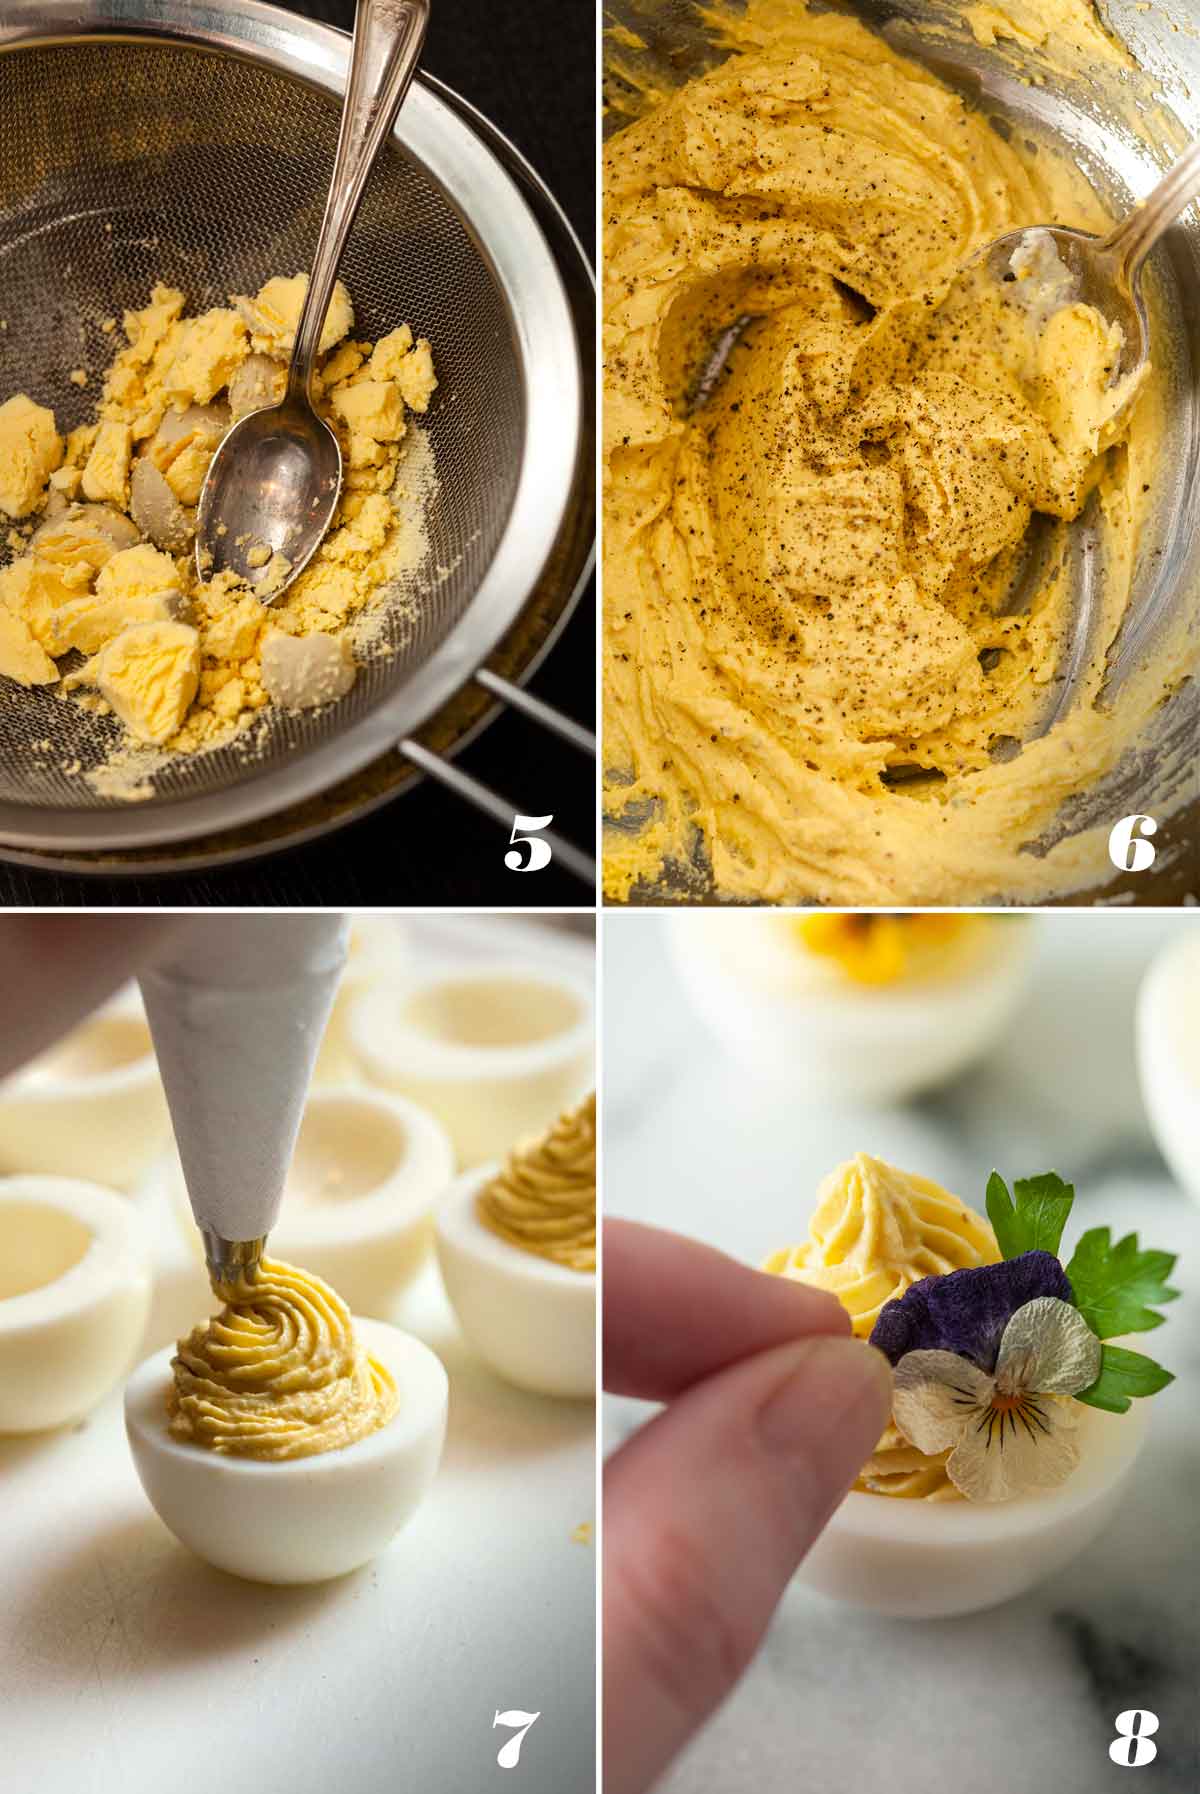 A collage of 4 numbered images, showing how to make deviled eggs and garnish them.